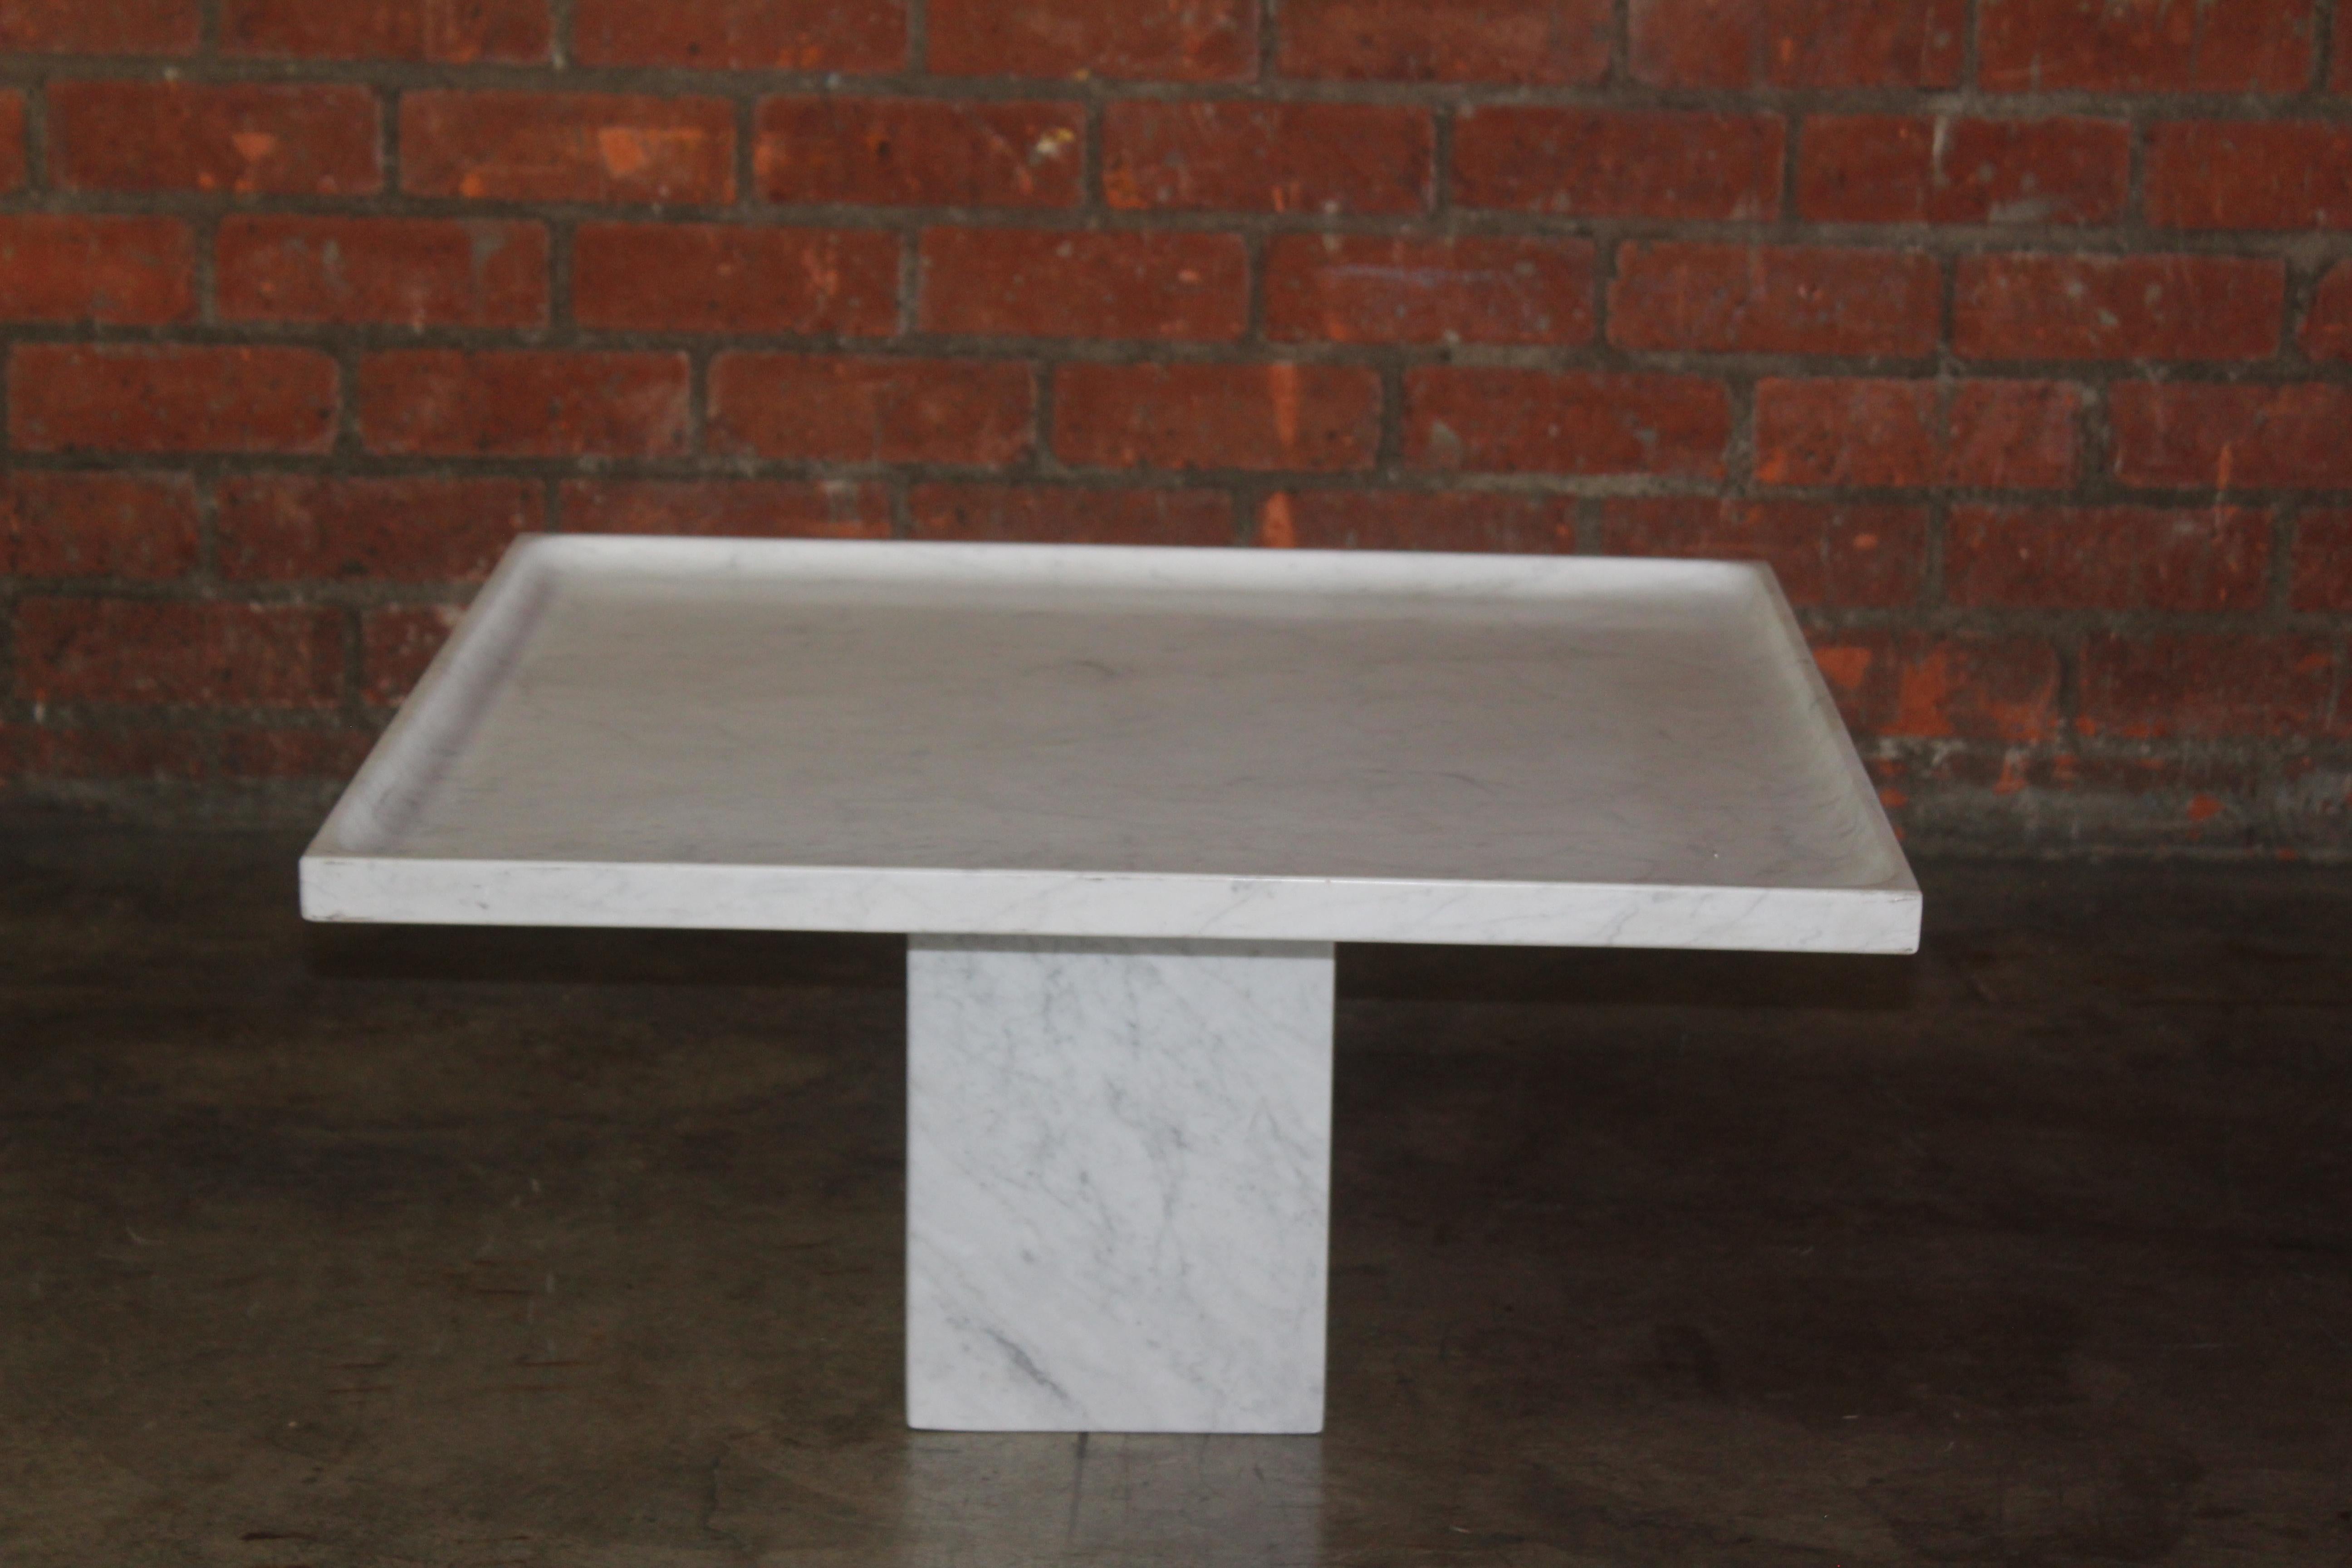 Italian marble coffee table on pedestal base, 1970s. The lipped top sits freely on the pedestal base.